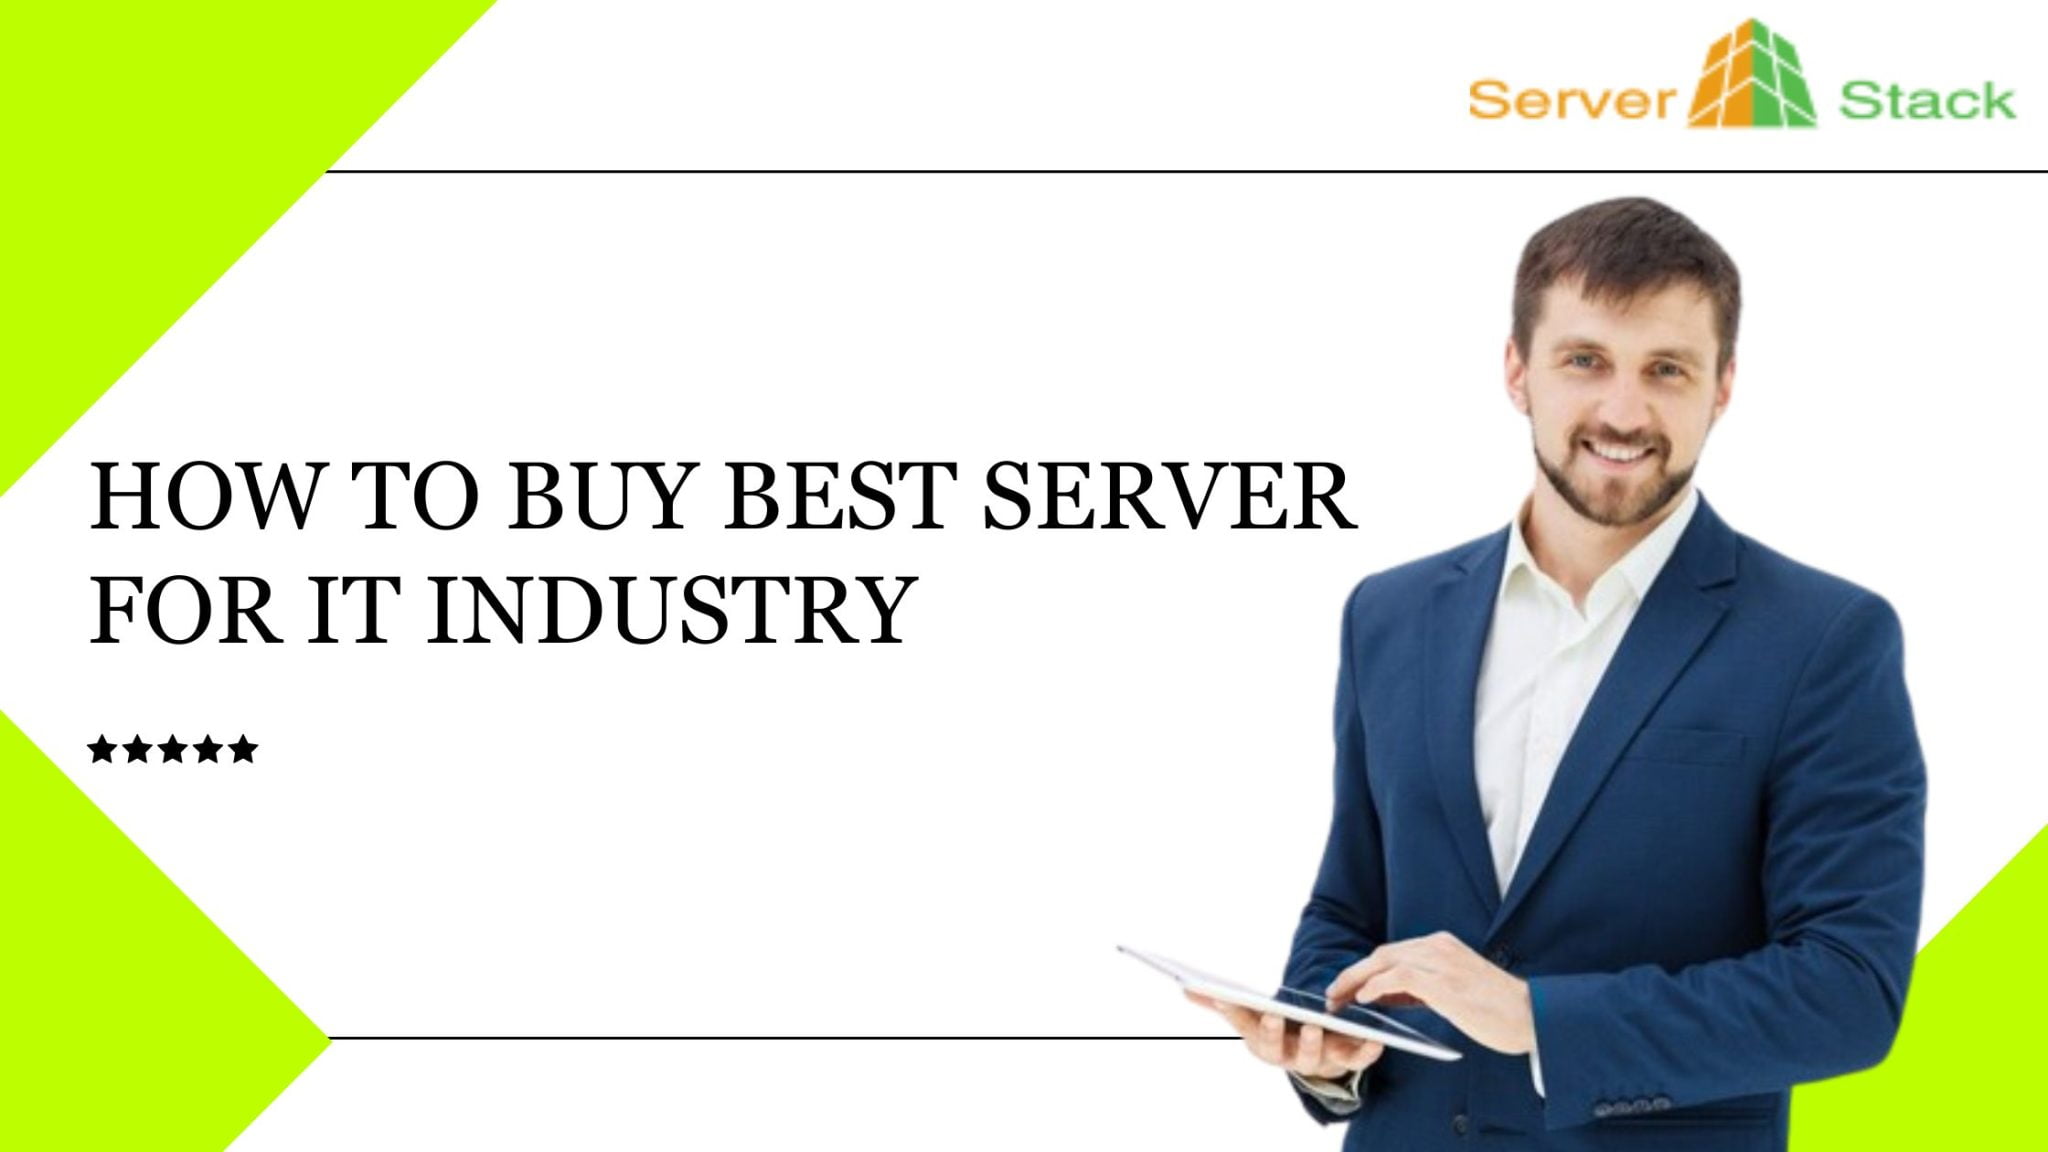 How To Buy Best Server For The IT Industry